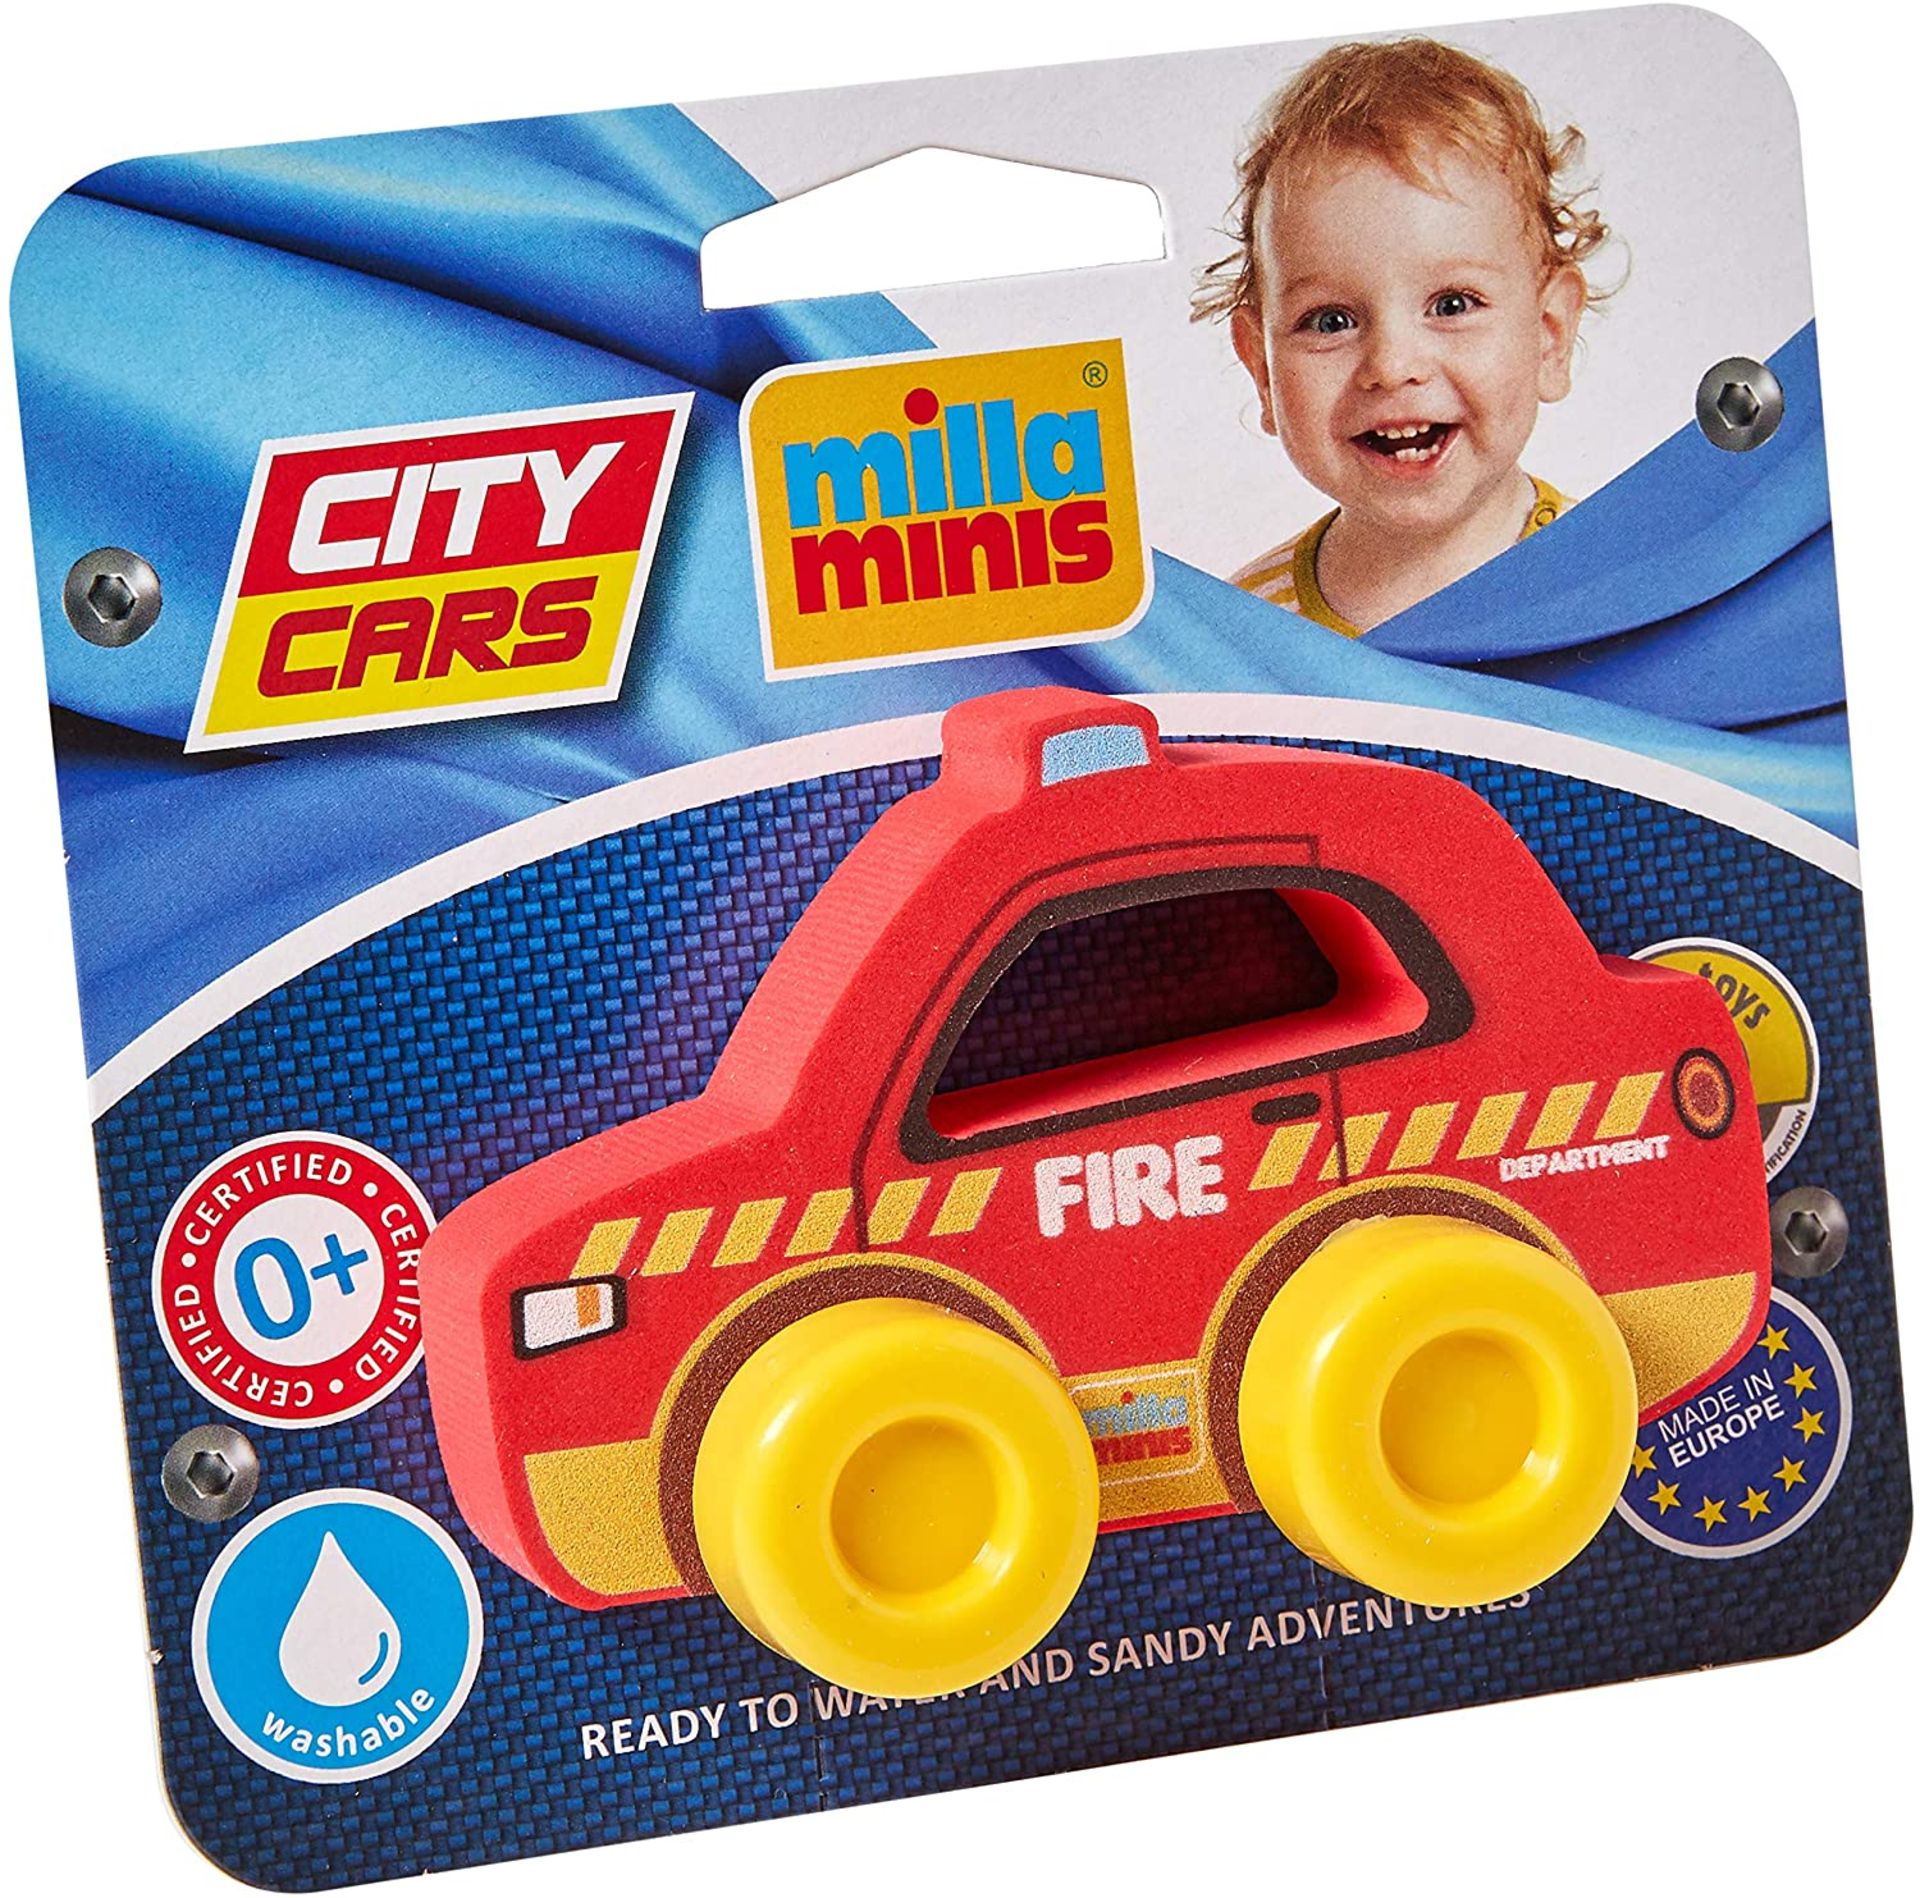 5 x Millaminis Millaminis0169 City Cars-Display-Made in Europe, Multi Colour |8595615201697 - Image 2 of 7